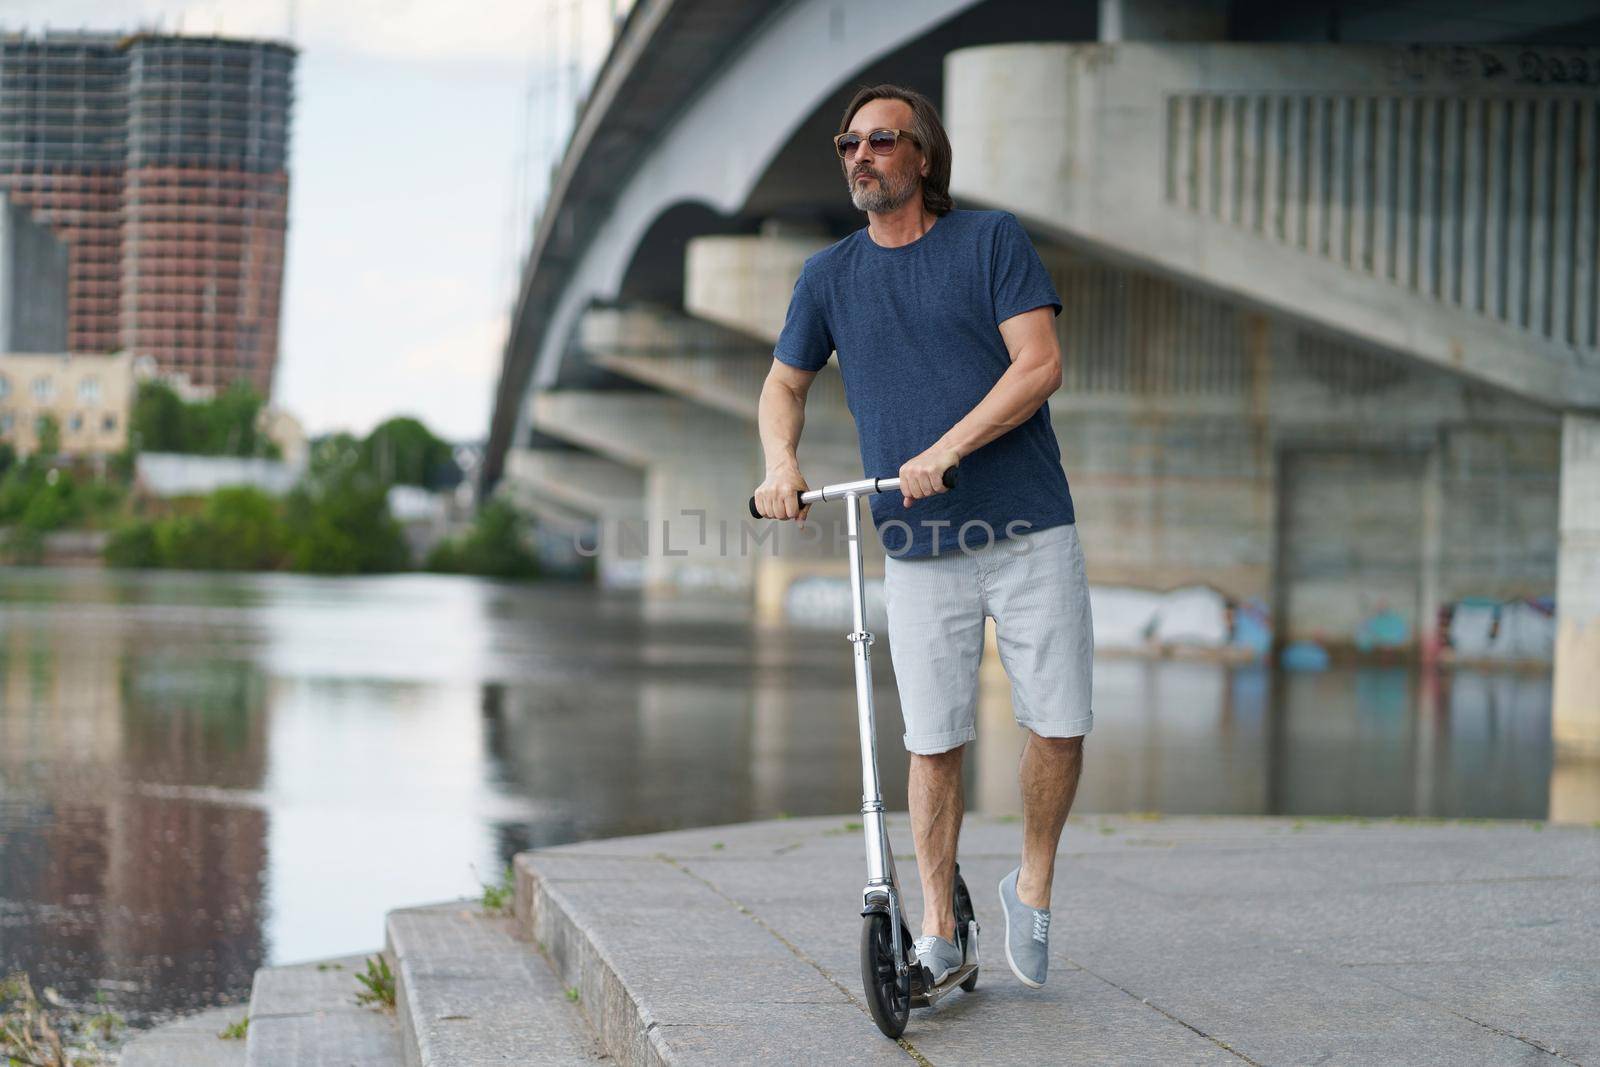 Riding scooter handsome stylish middle aged man with grey beard stand under town bridge over river with urban city on background after work outdoors. Travel, lifestyle concept.